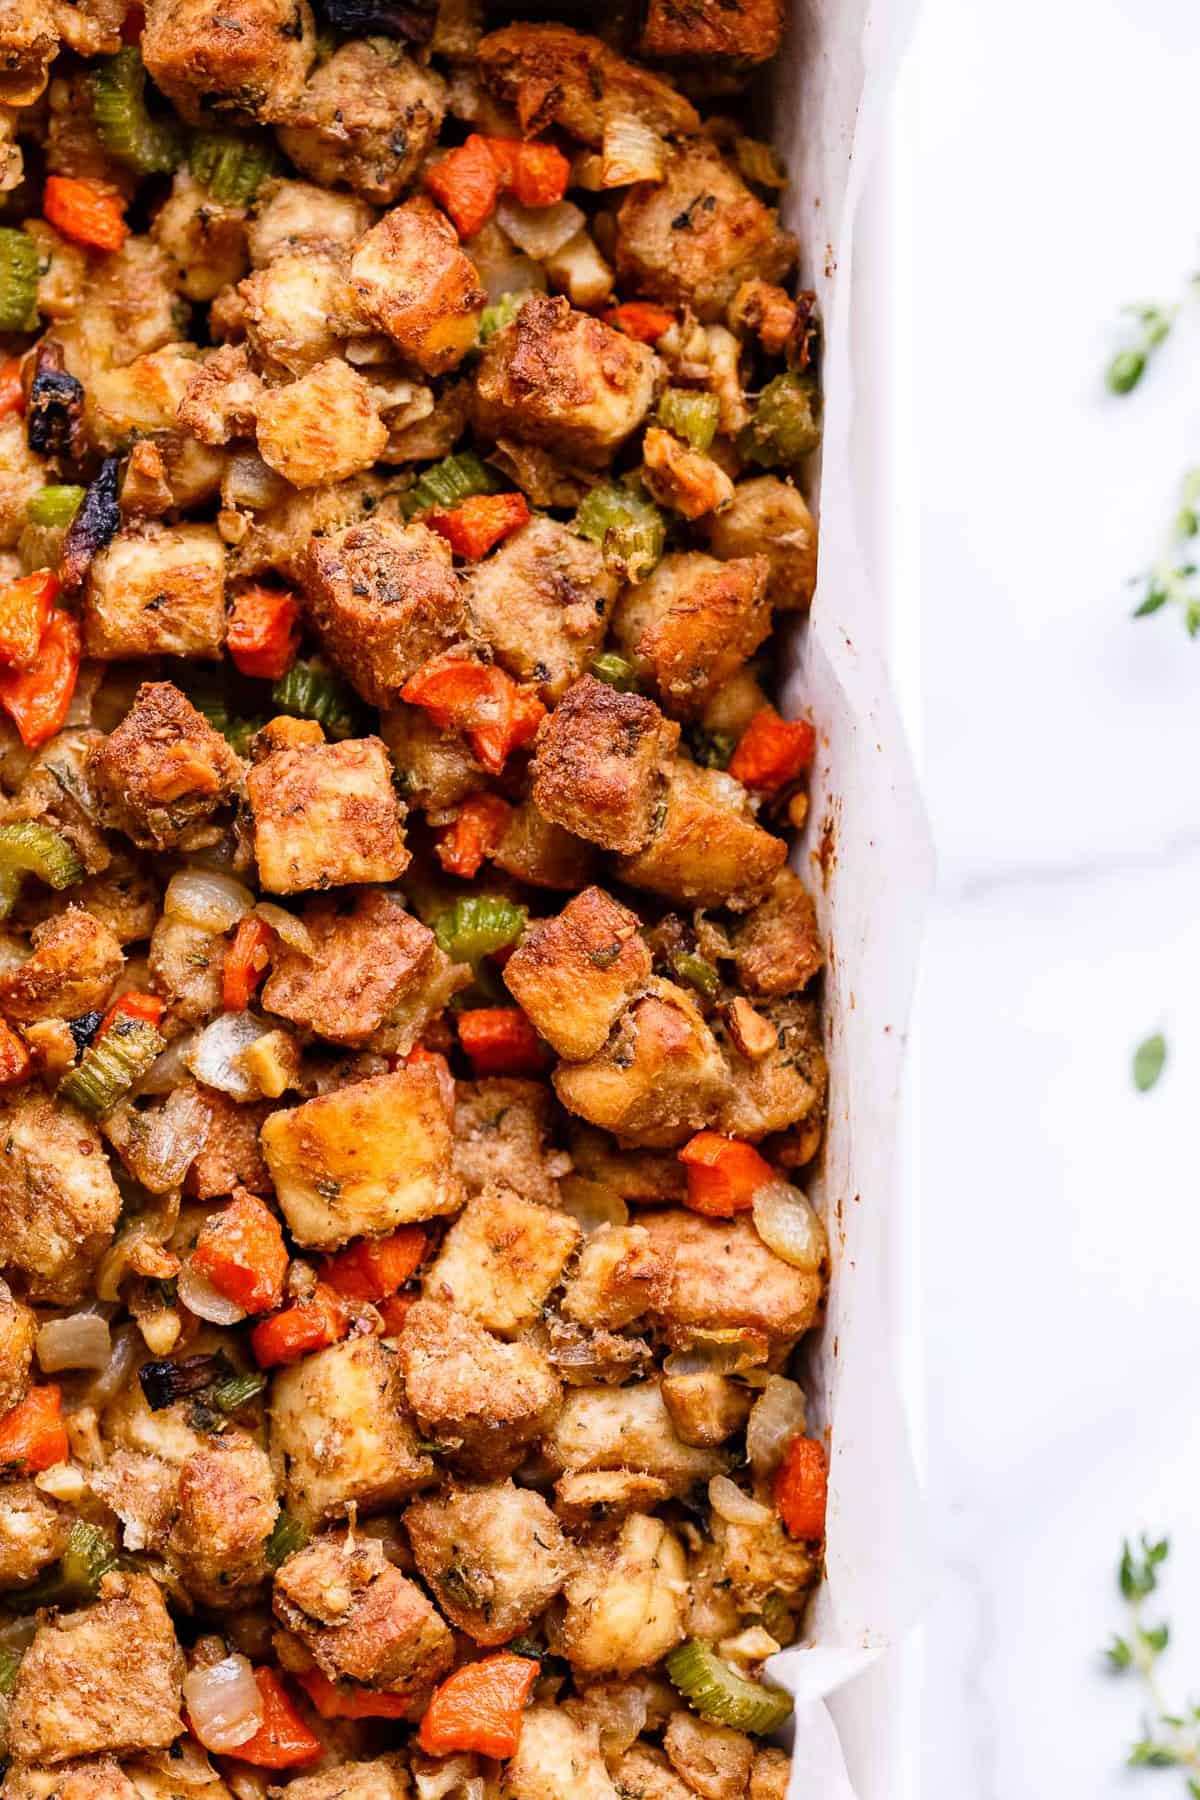 Vegan vegetable stuffing in a white casserole dish.